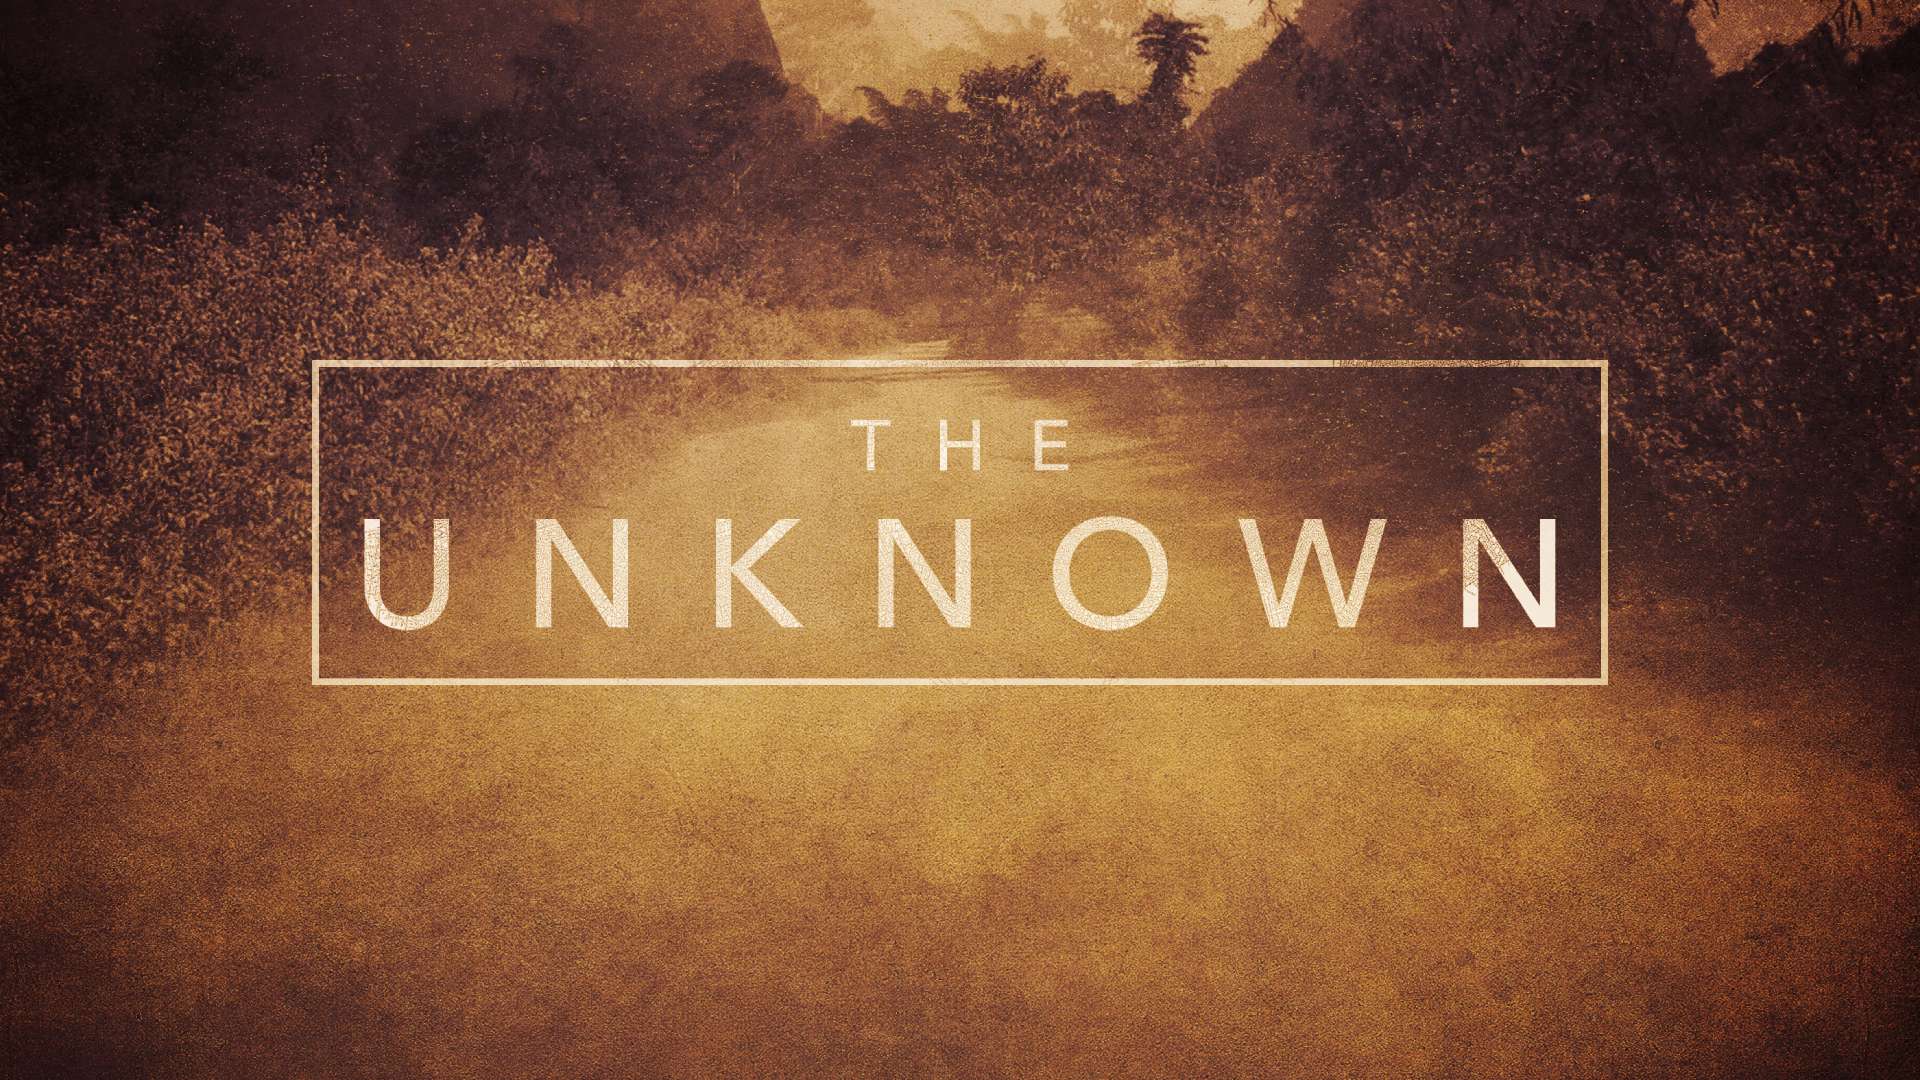 Title image for the sermon "The Unknown"